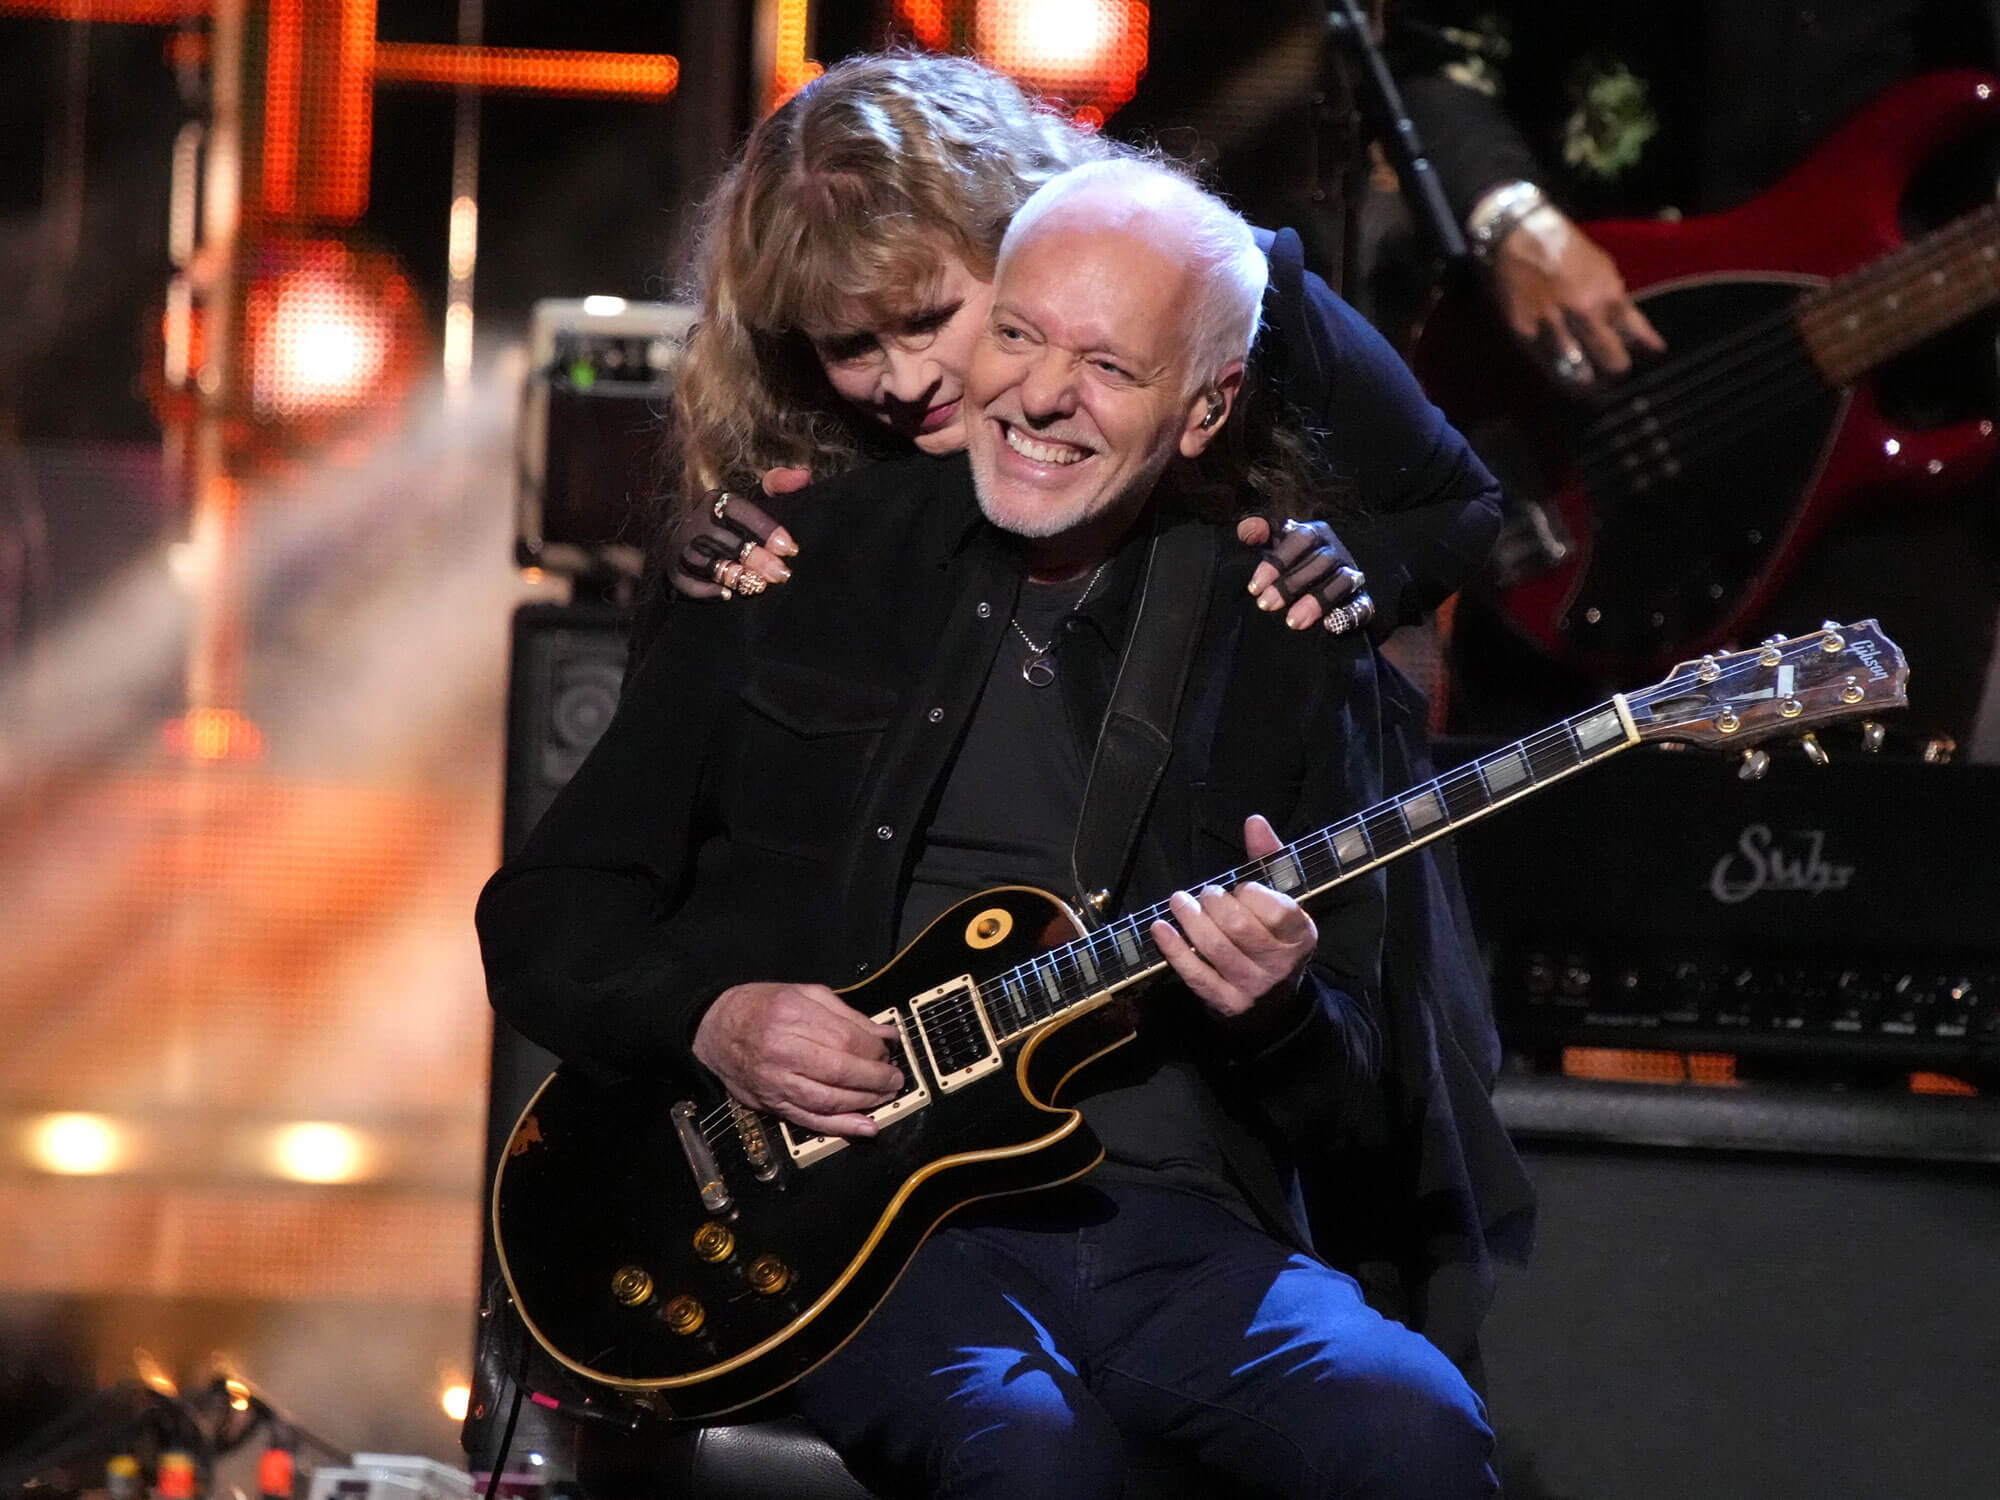 [L-R] Stevie Nicks and Peter Frampton performing at the 2023 Rock and Roll Hall of Fame induction ceremony